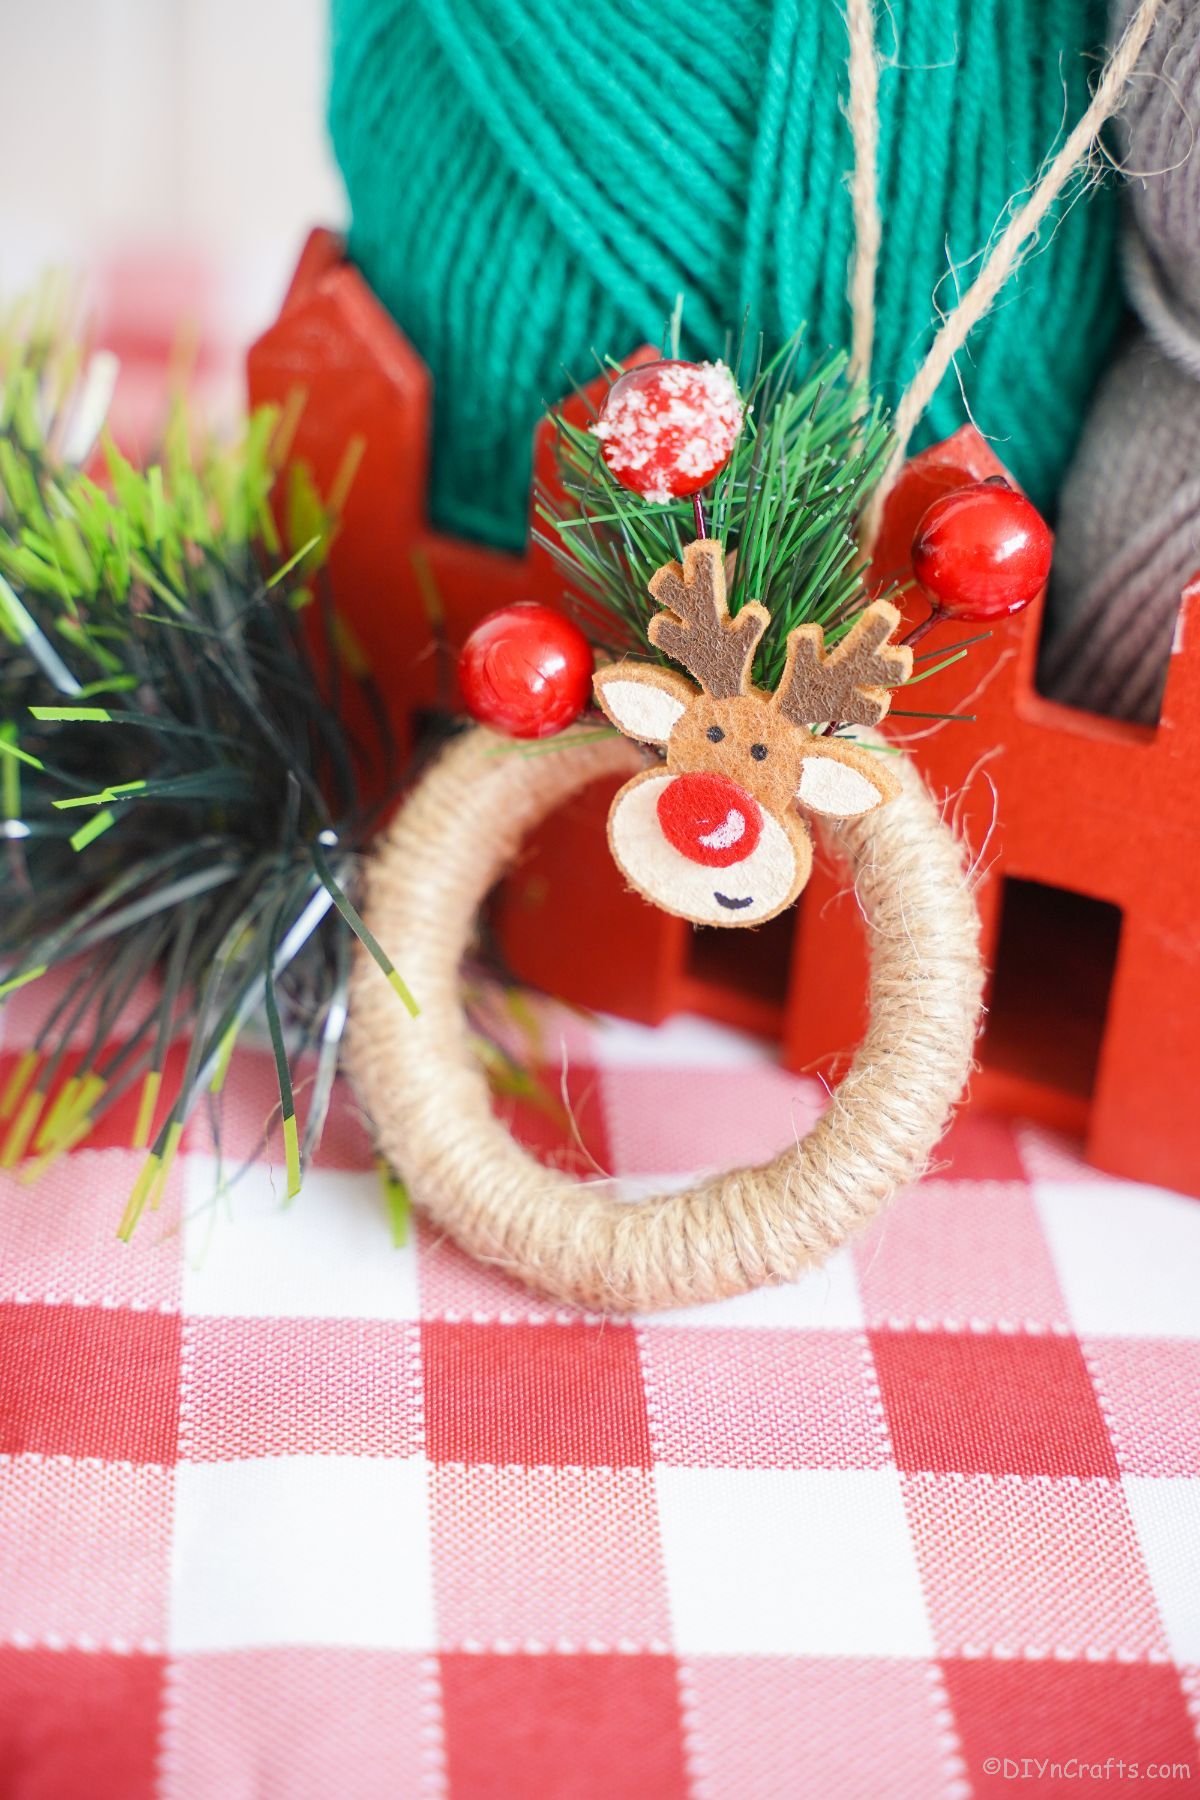 mini wreath ornament leaning against red basket on checked tablecloth